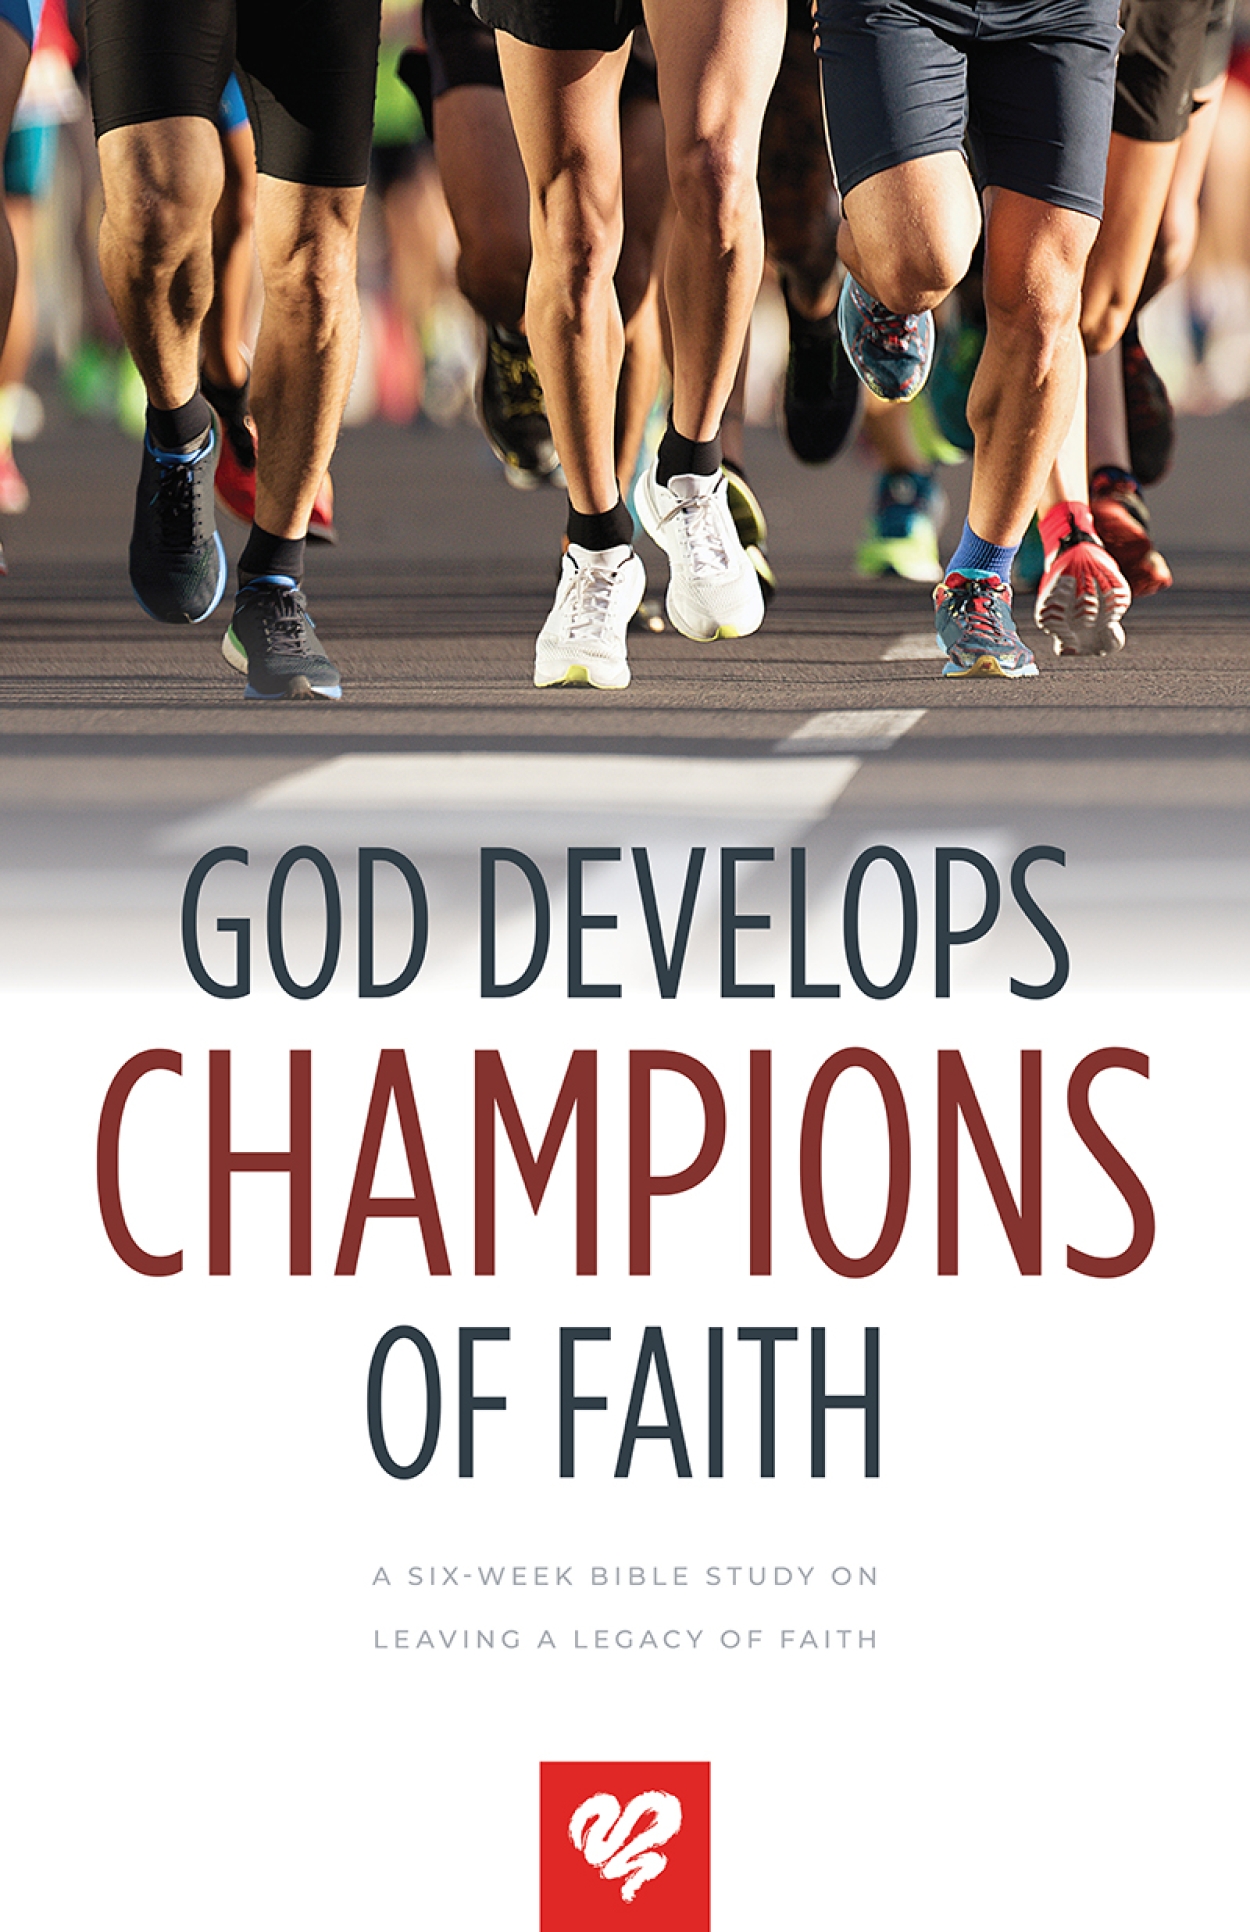 God develops champions of faith bible study bss175 store detail front